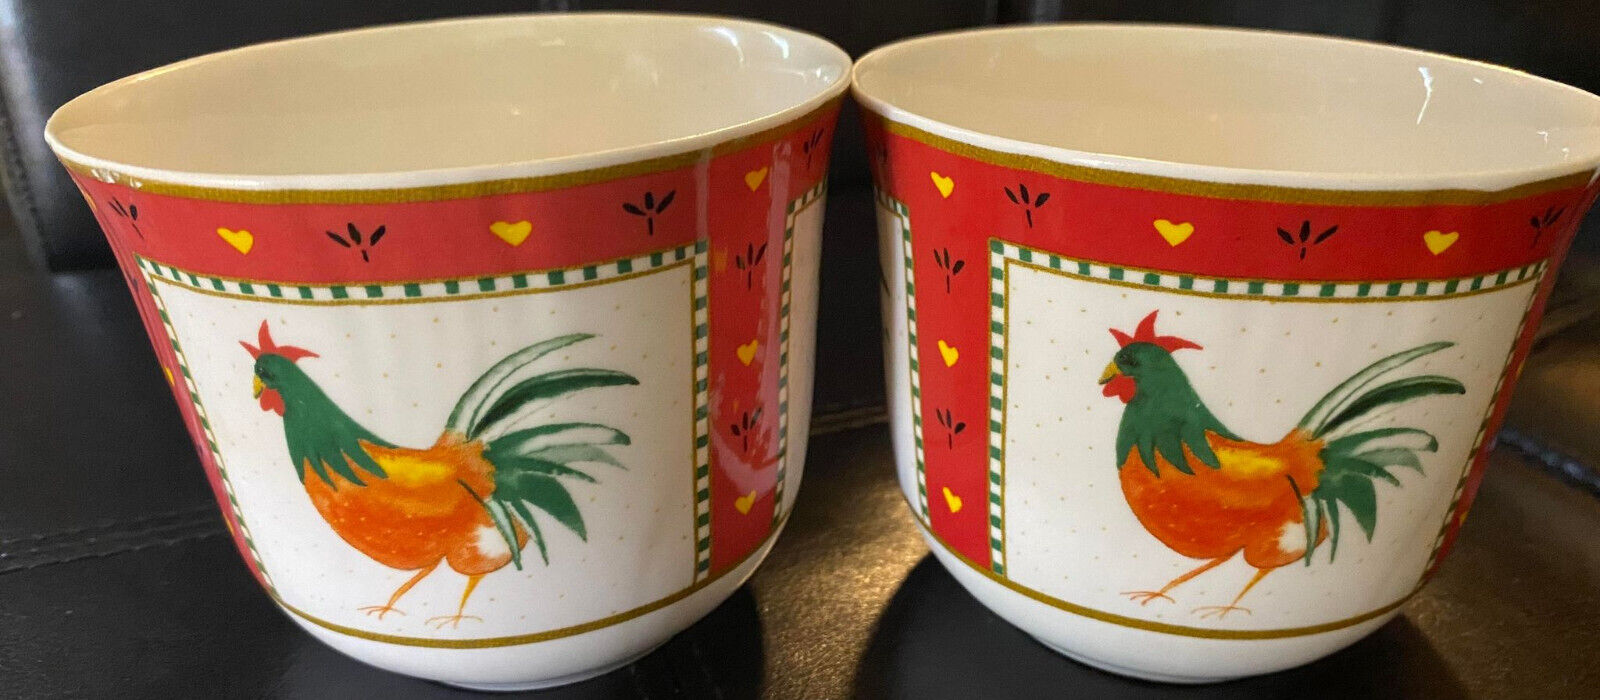 Vintage Set of Two Heirloom Fine Bone China, England, Large Rooster Cups 4.5” x